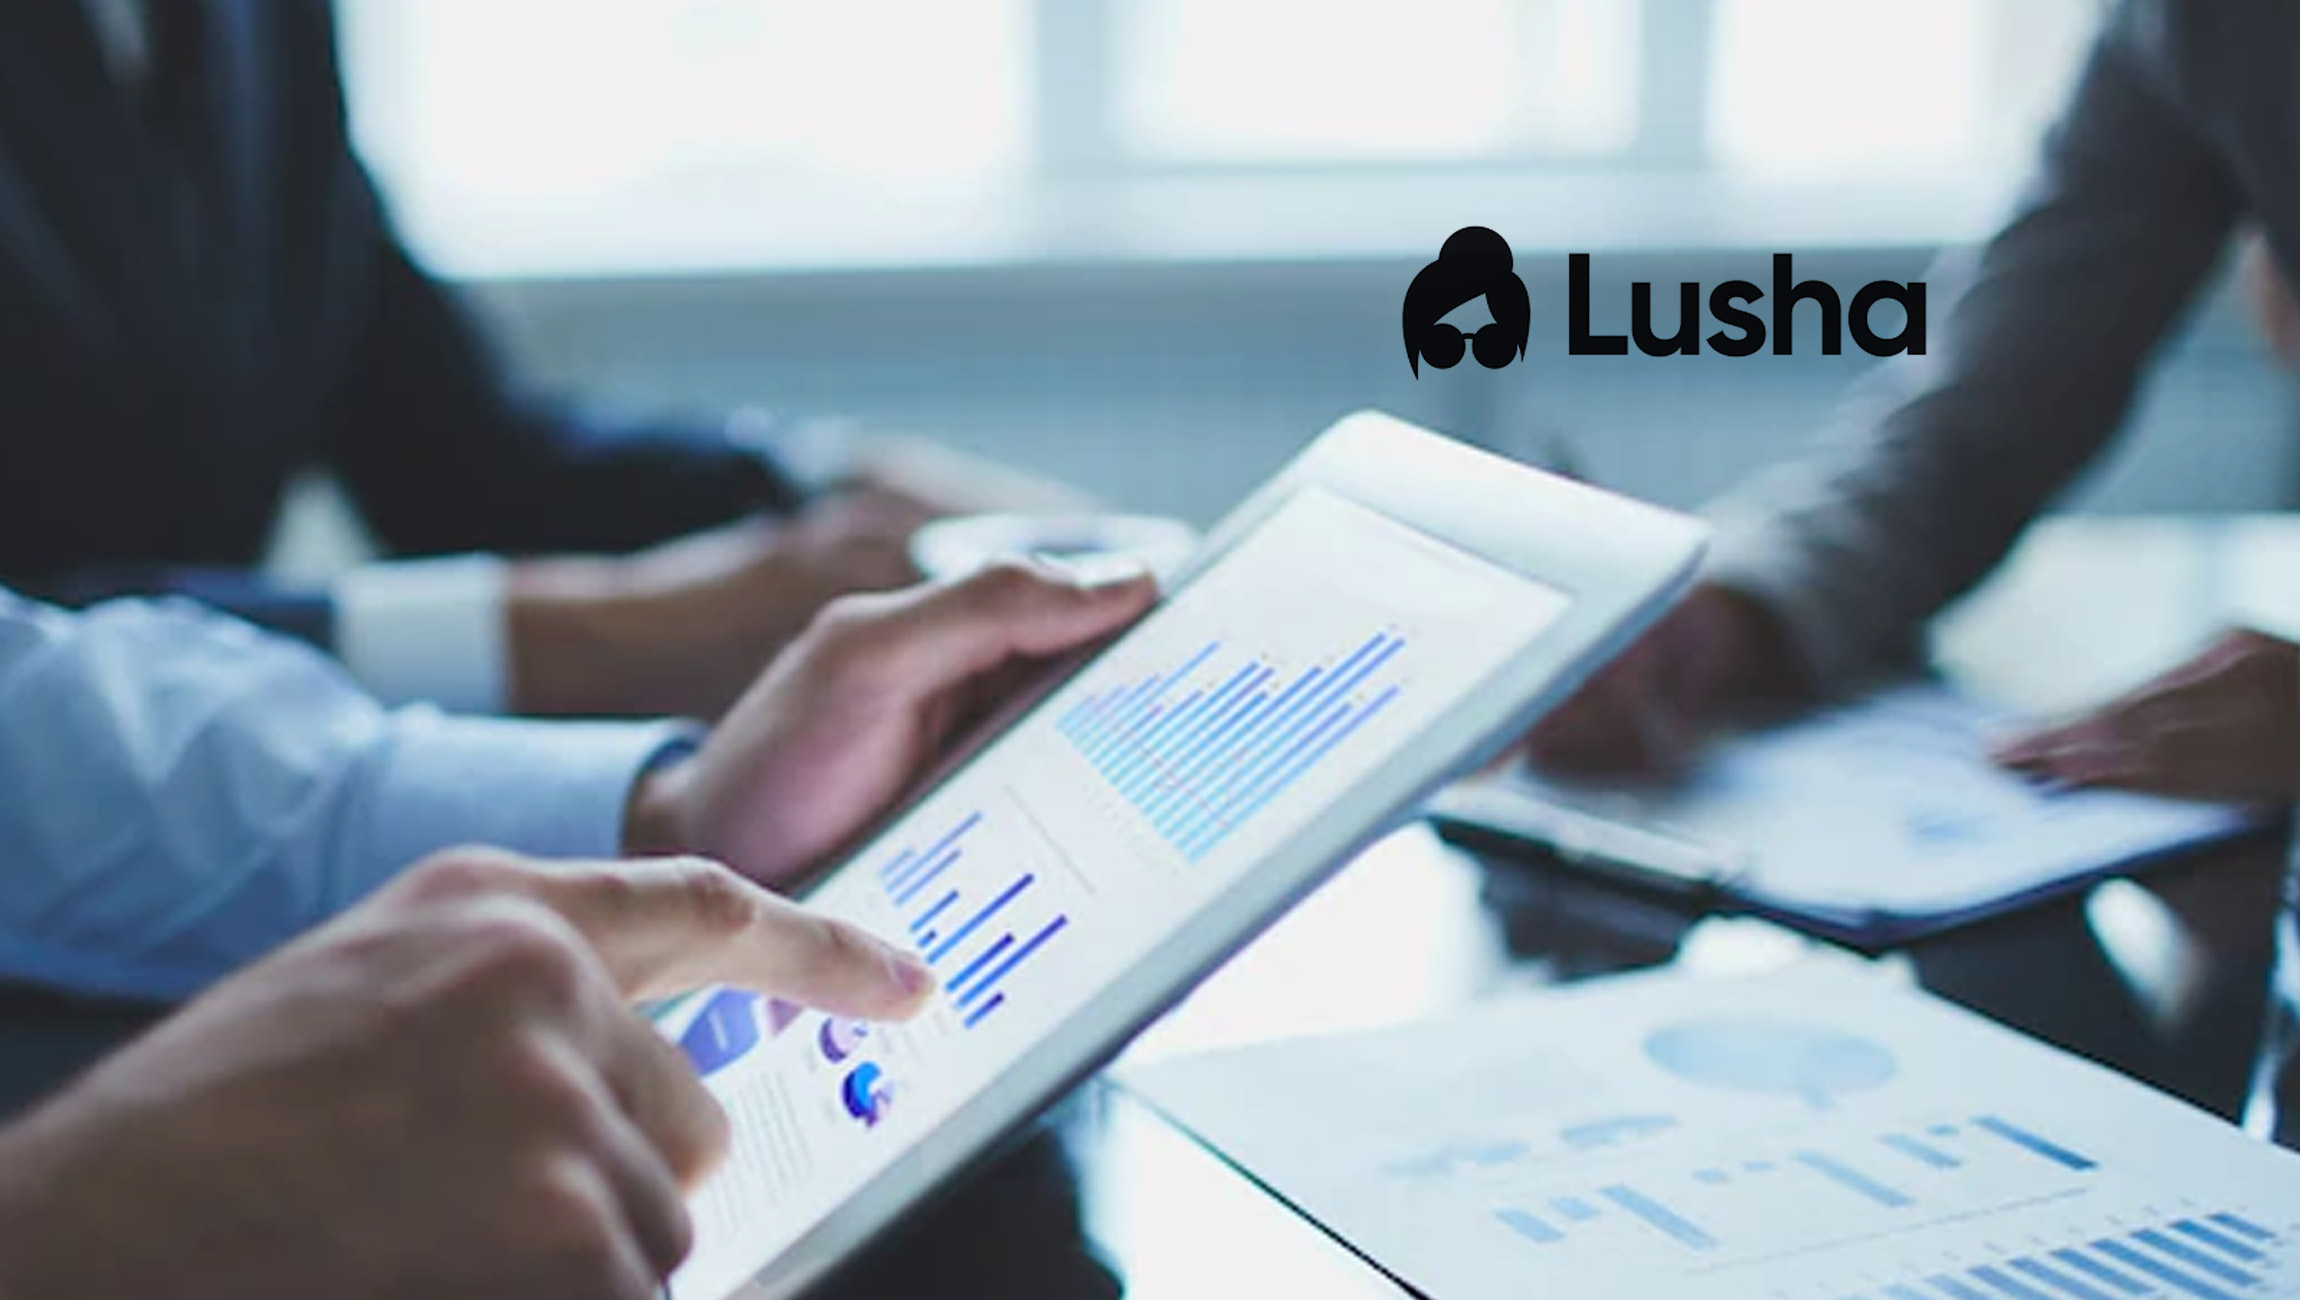 B2B Sales Must Reform: Lusha Data Report Finds Poorly Targeted Sales Outreach Directly Damages Company Reputation